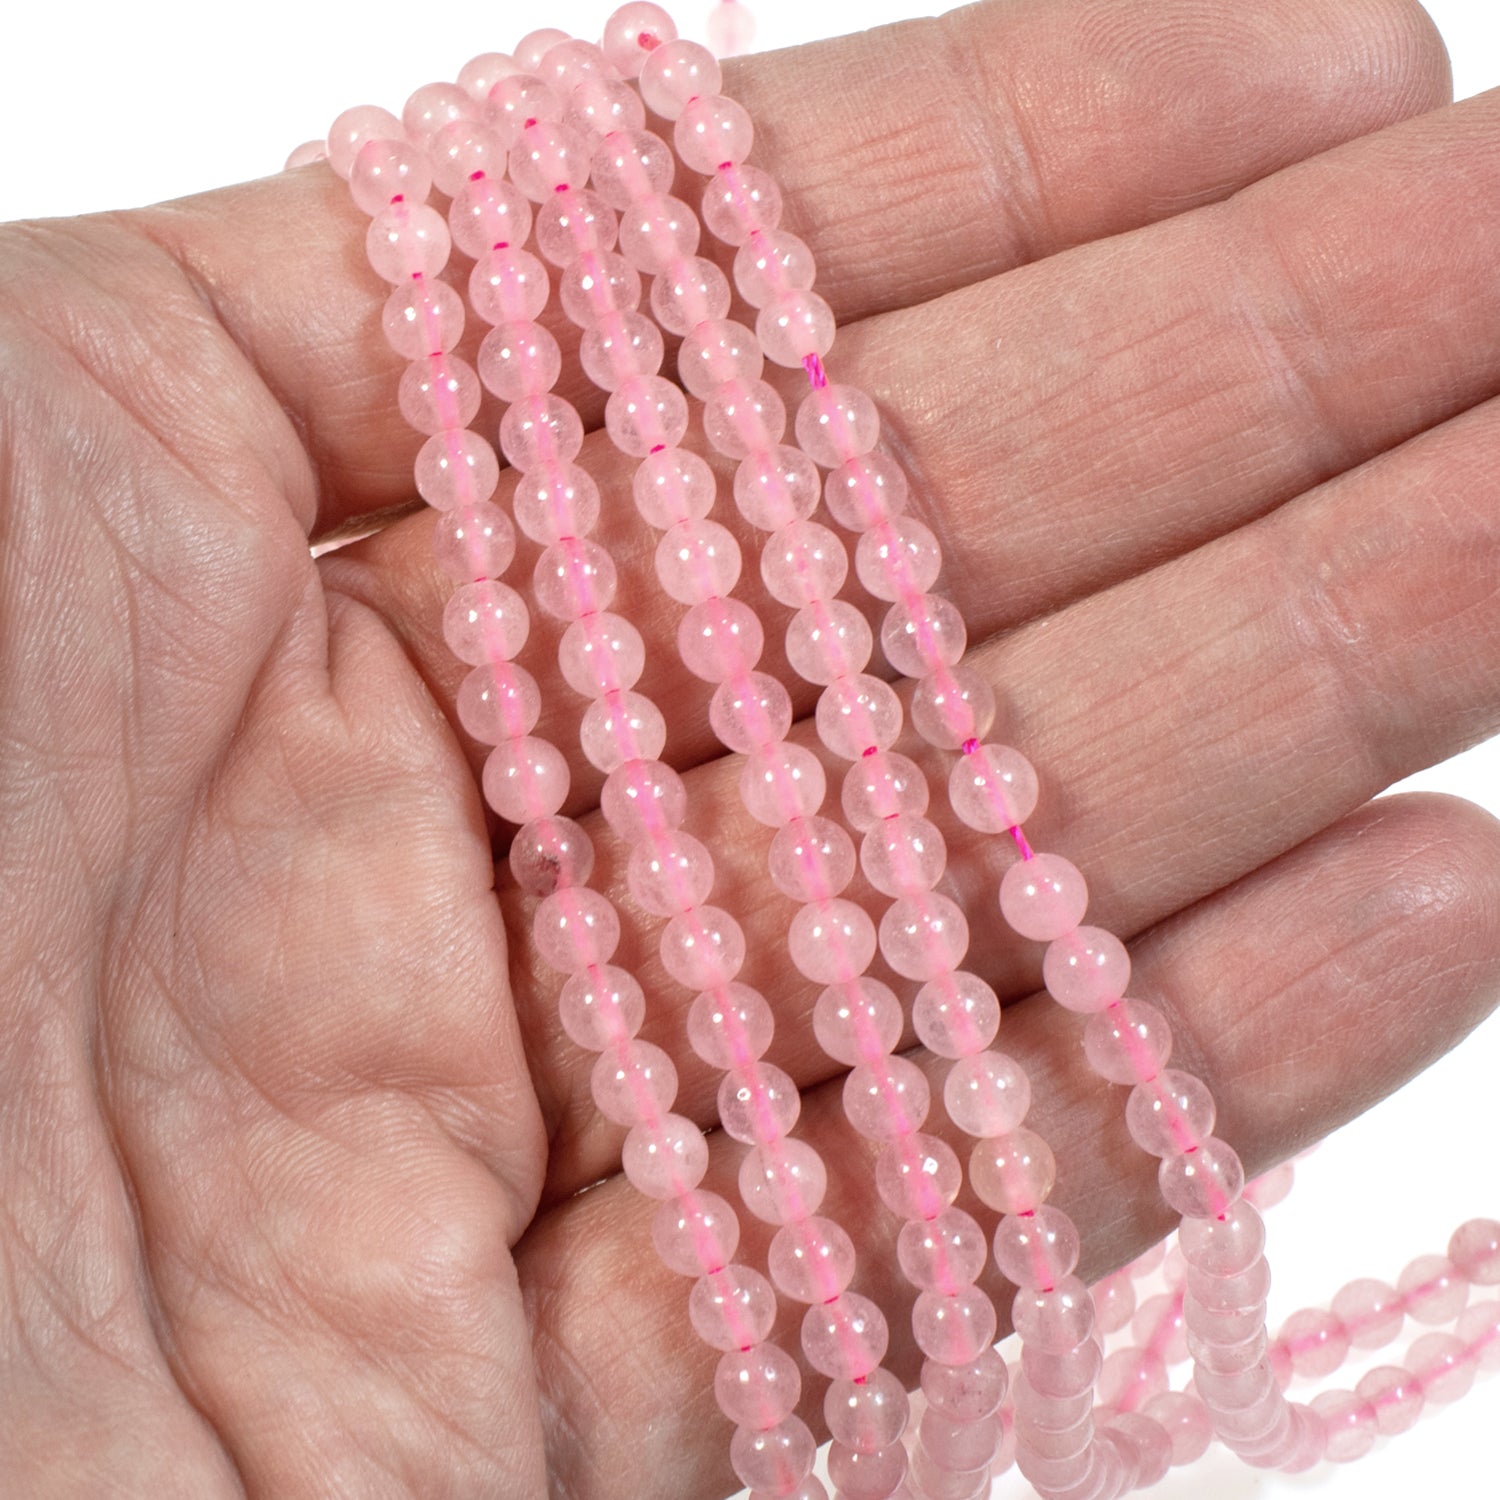 Natural different crystal stone 4mm round beads stretchable